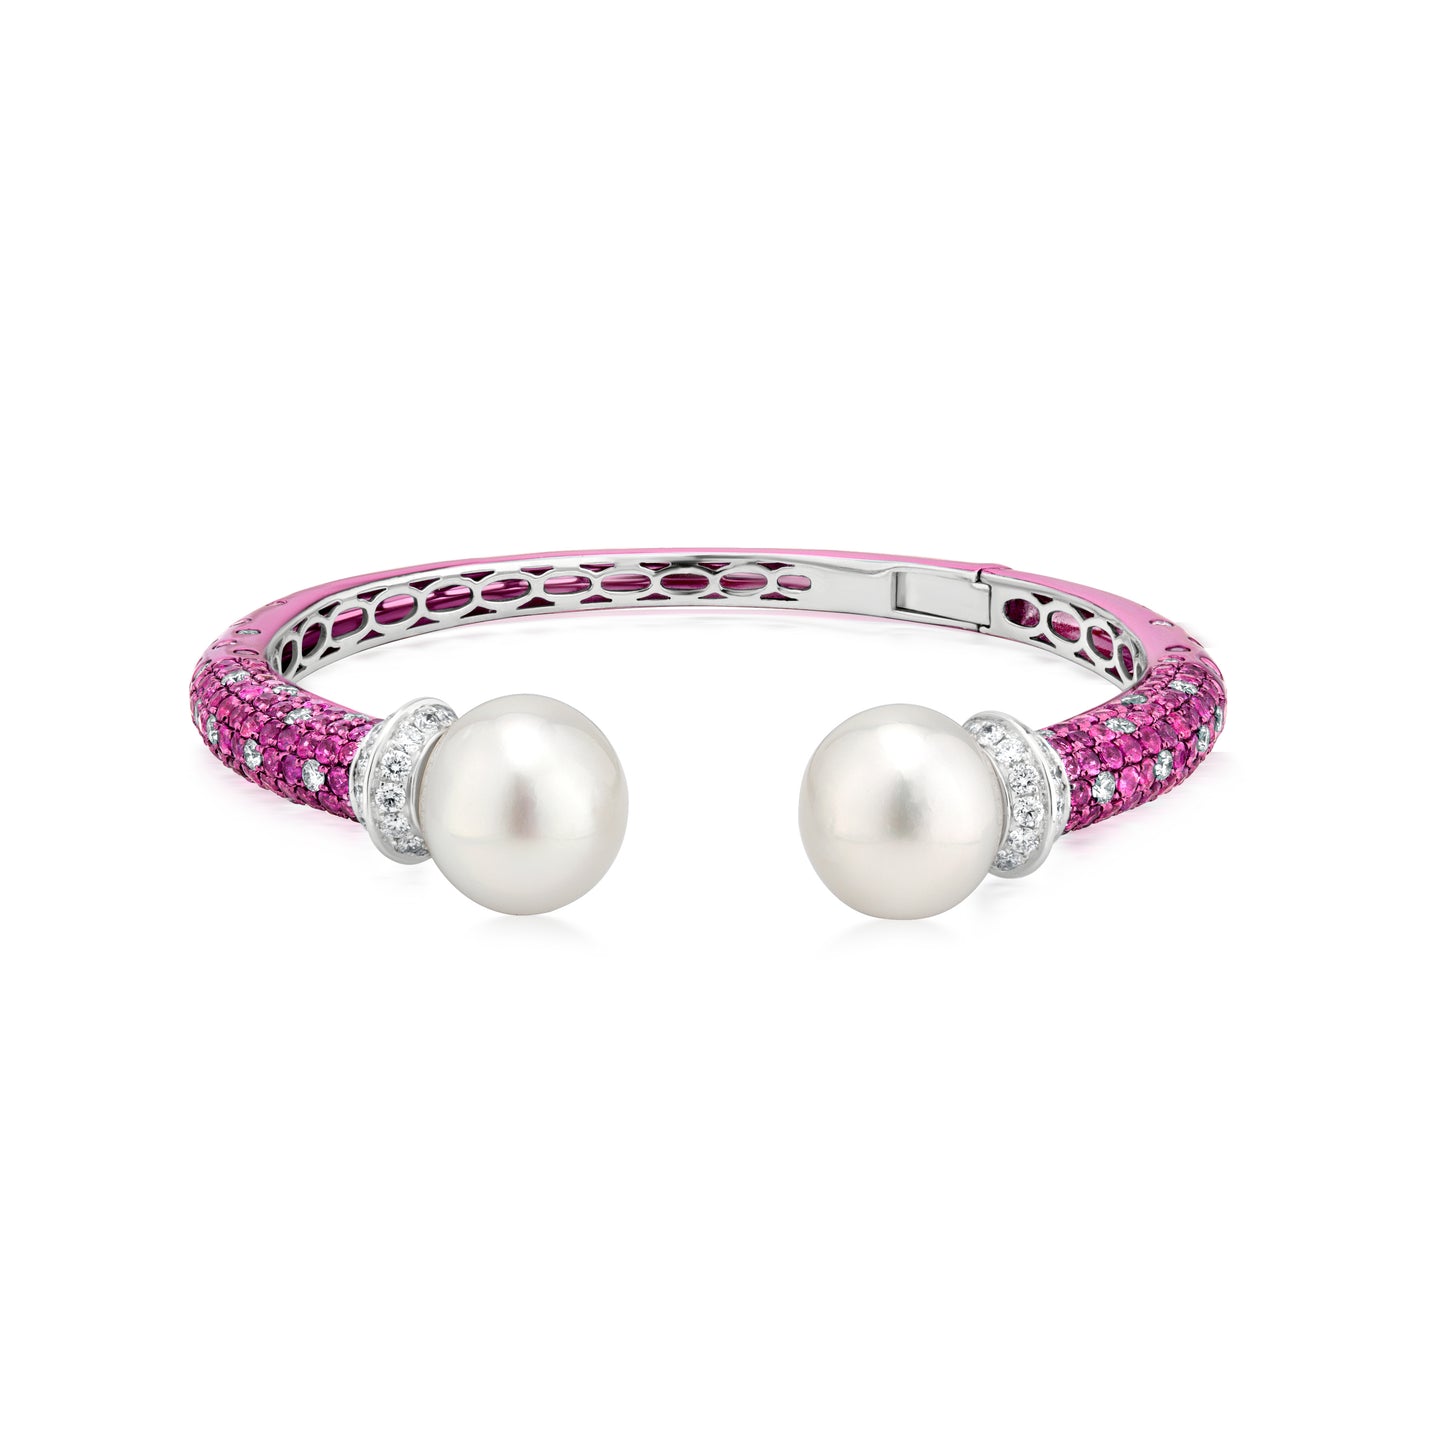 Bangle With Pearl,Ruby And Diamond In 18K White Gold And Pink Rhodium